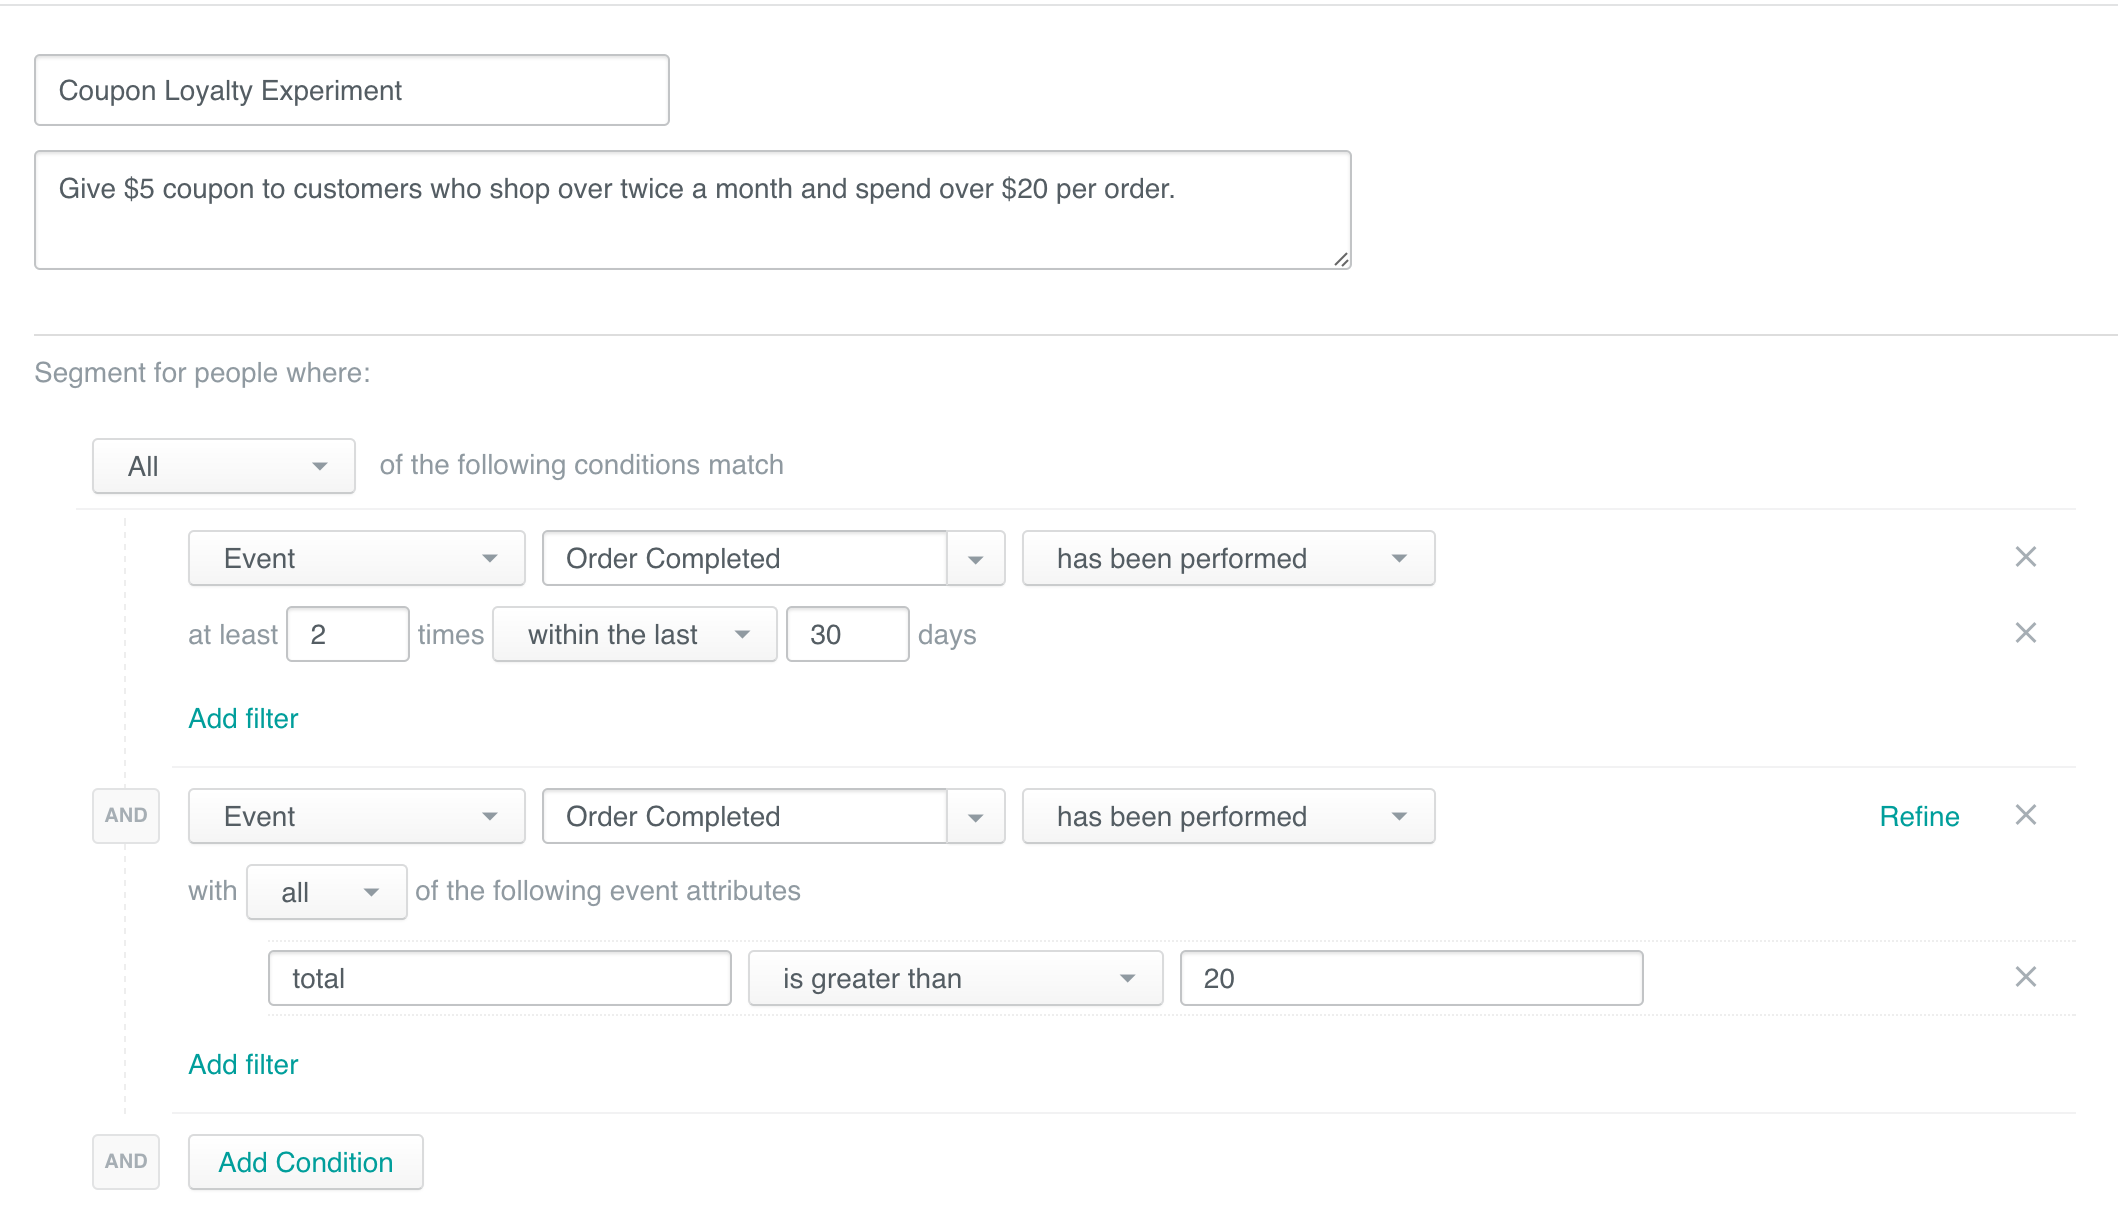 Screenshot of the Segment builder in Customer.io, with the title "Coupon Loyalty Experiment".